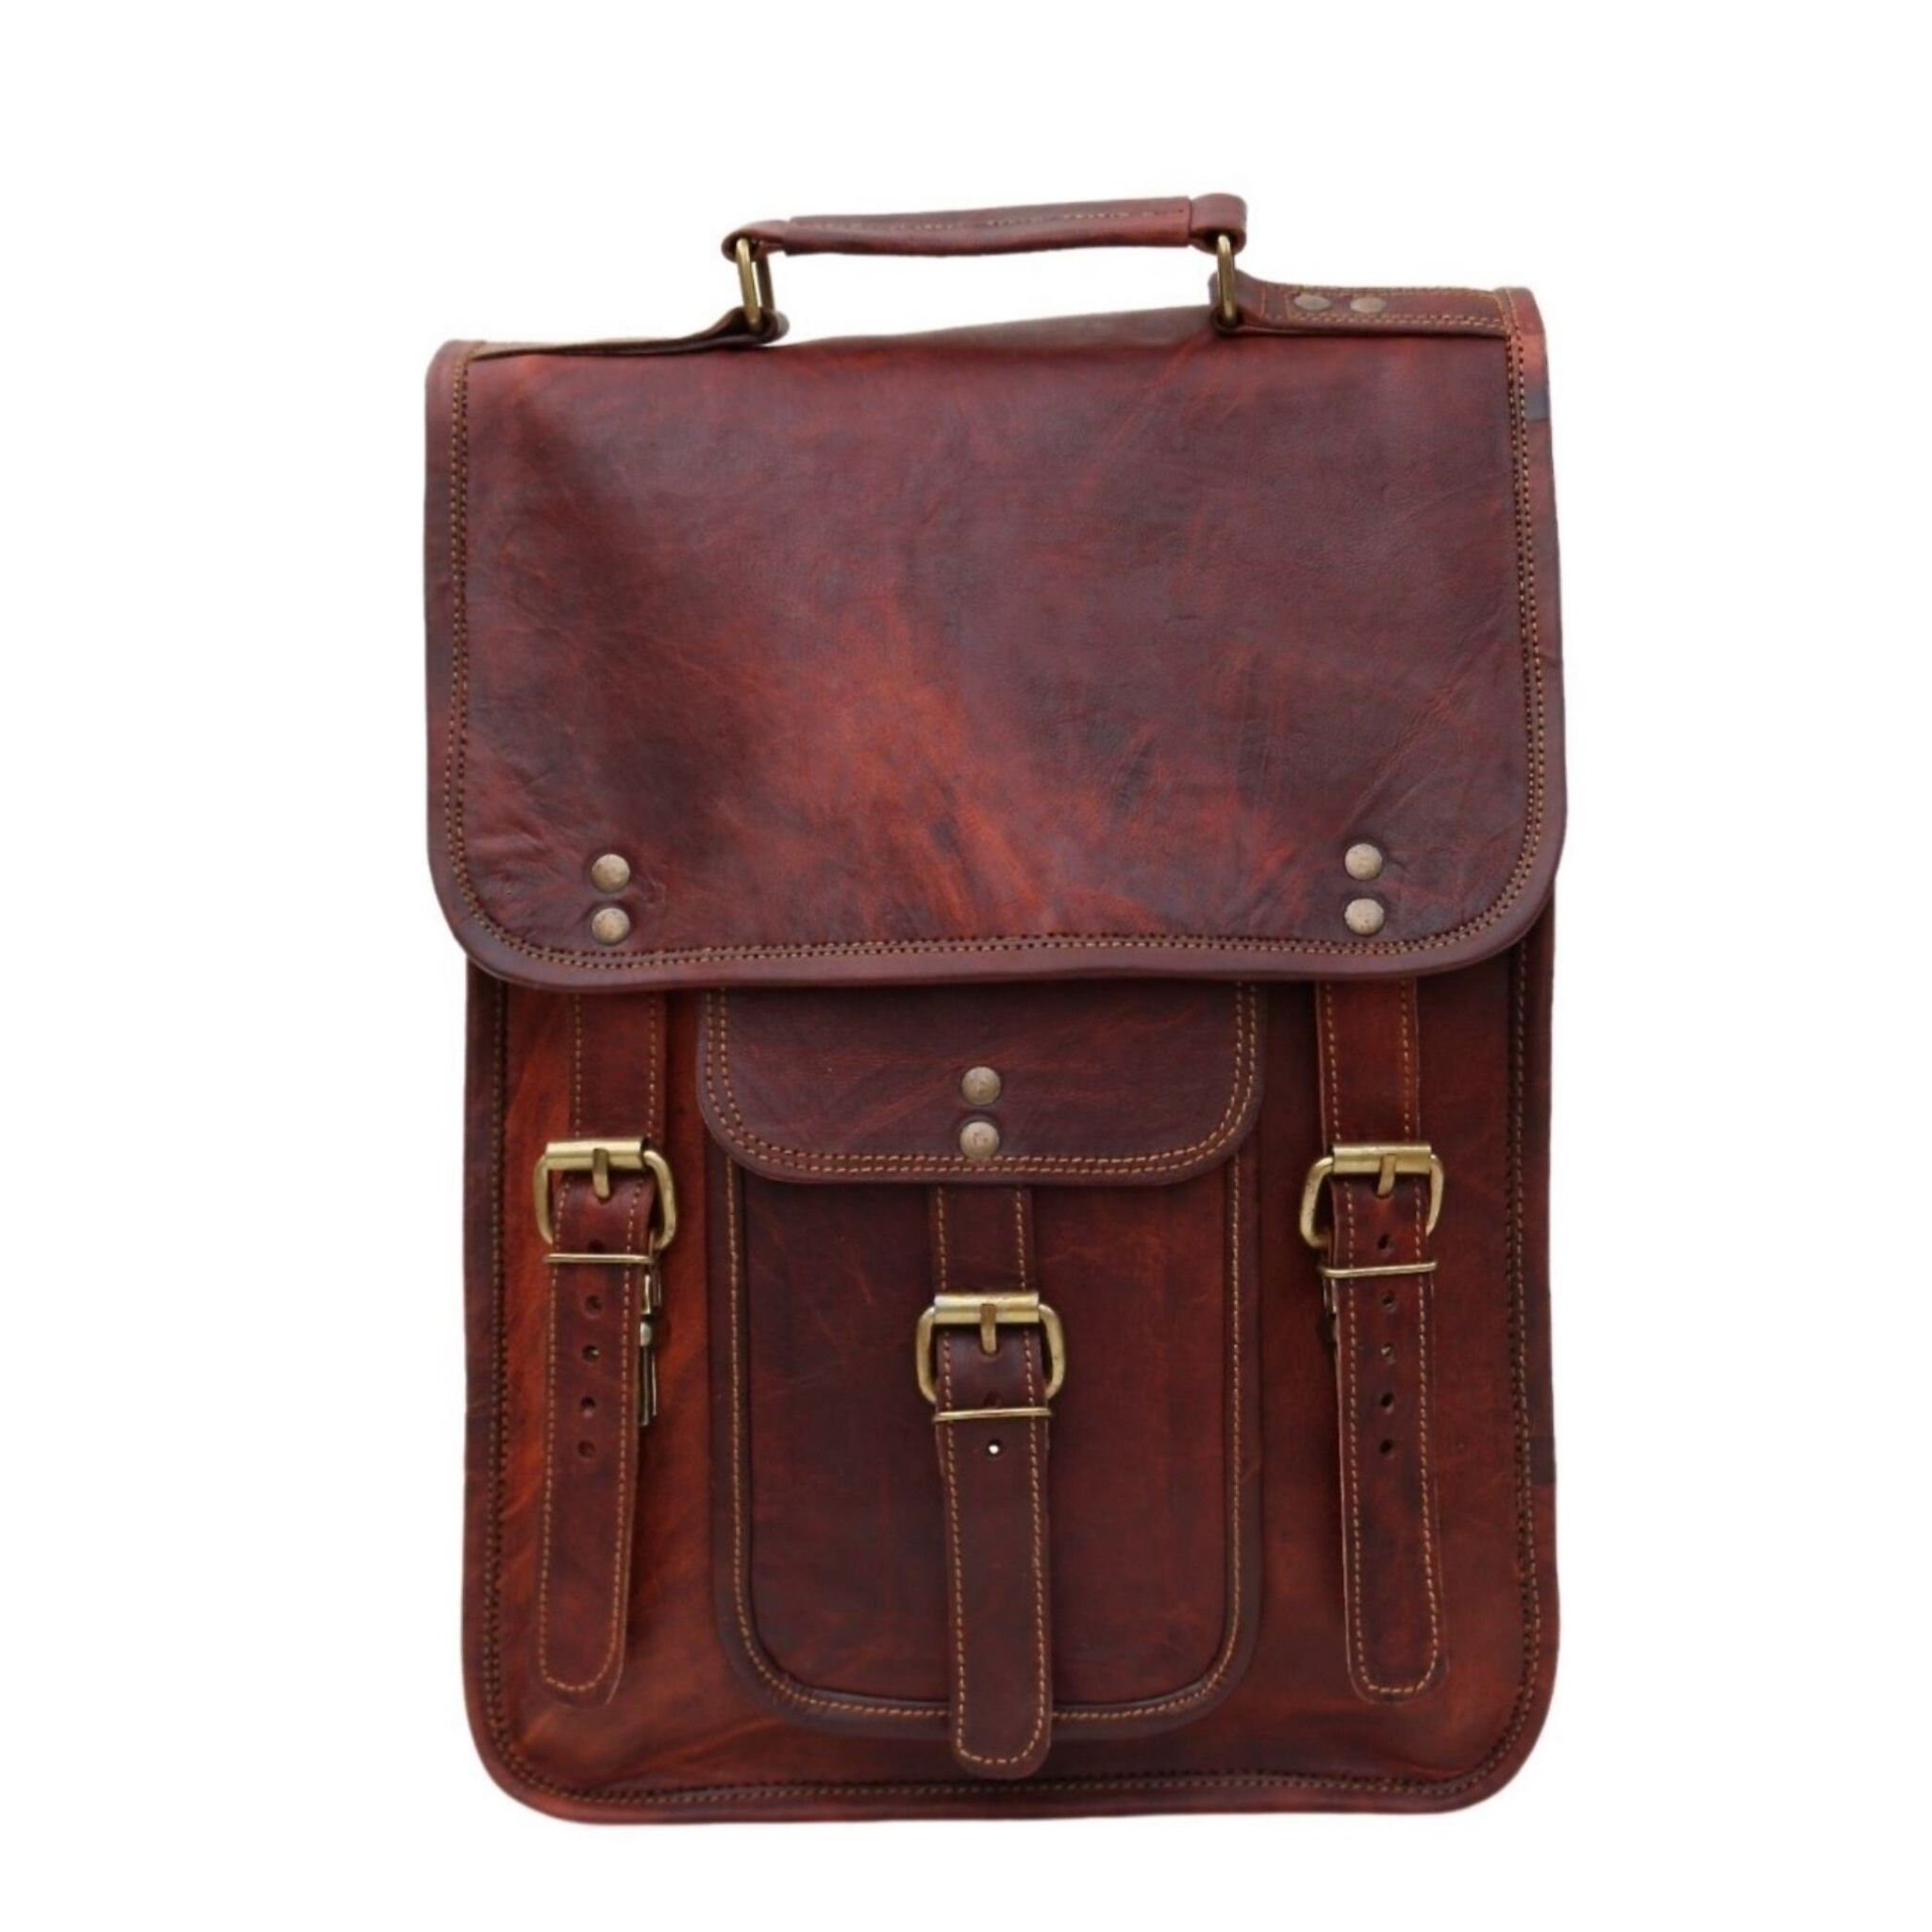 LEATHER SATCHEL BACKPACK, Atlas 15 tall